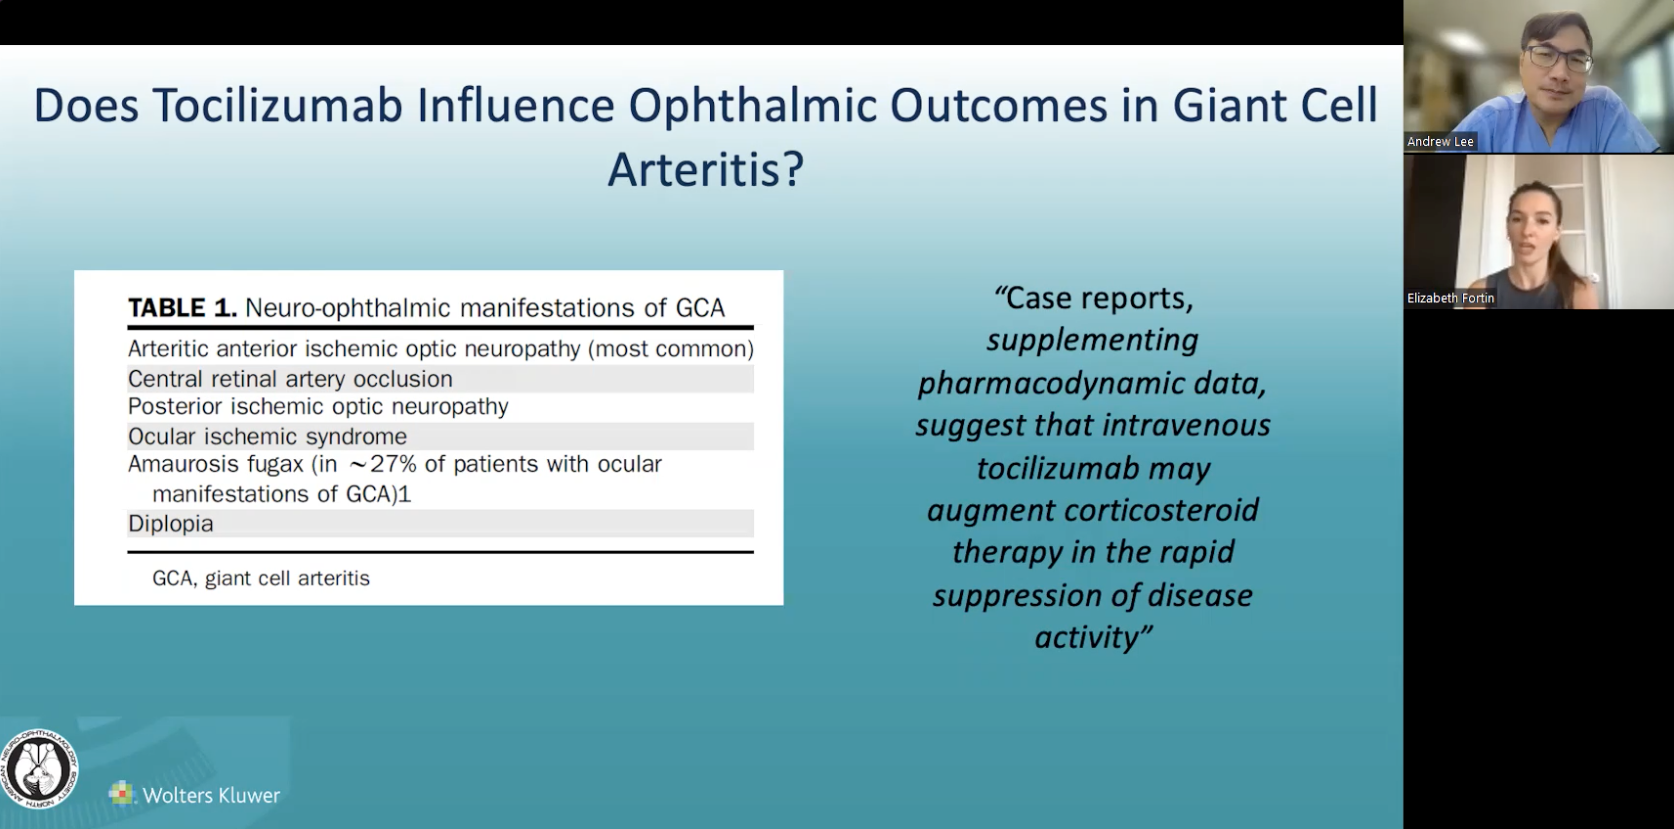 Vlog: Tocilizumab can have an influence on ophthalmic outcomes in giant cell arteritis